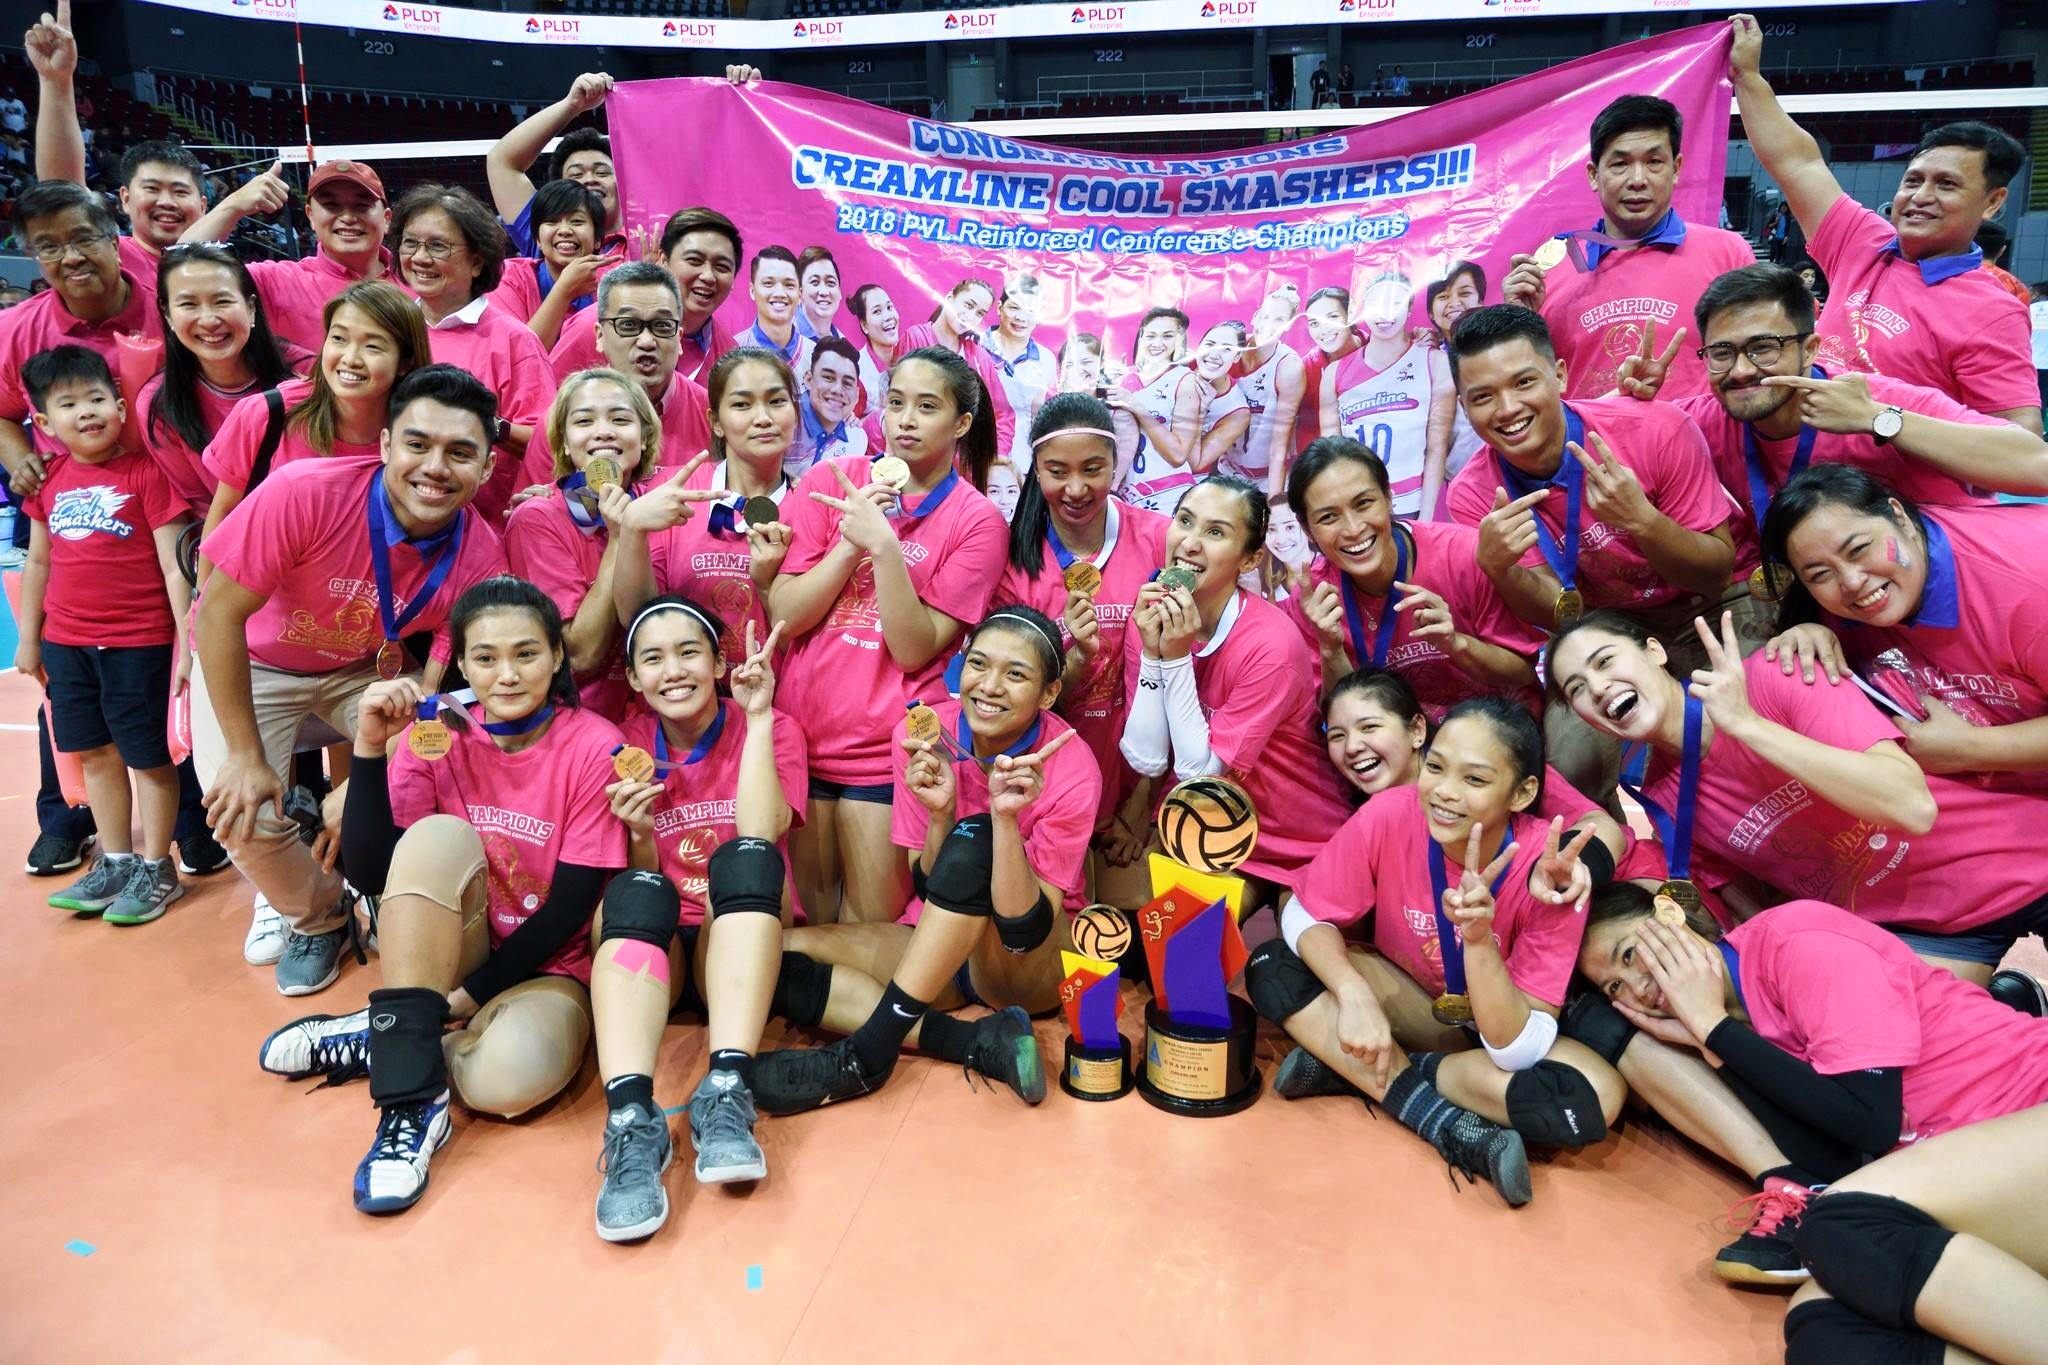 The Creamline Cool Smashers emerged as the champions of the 2018 Premier Volleyball League Reinforced Conference